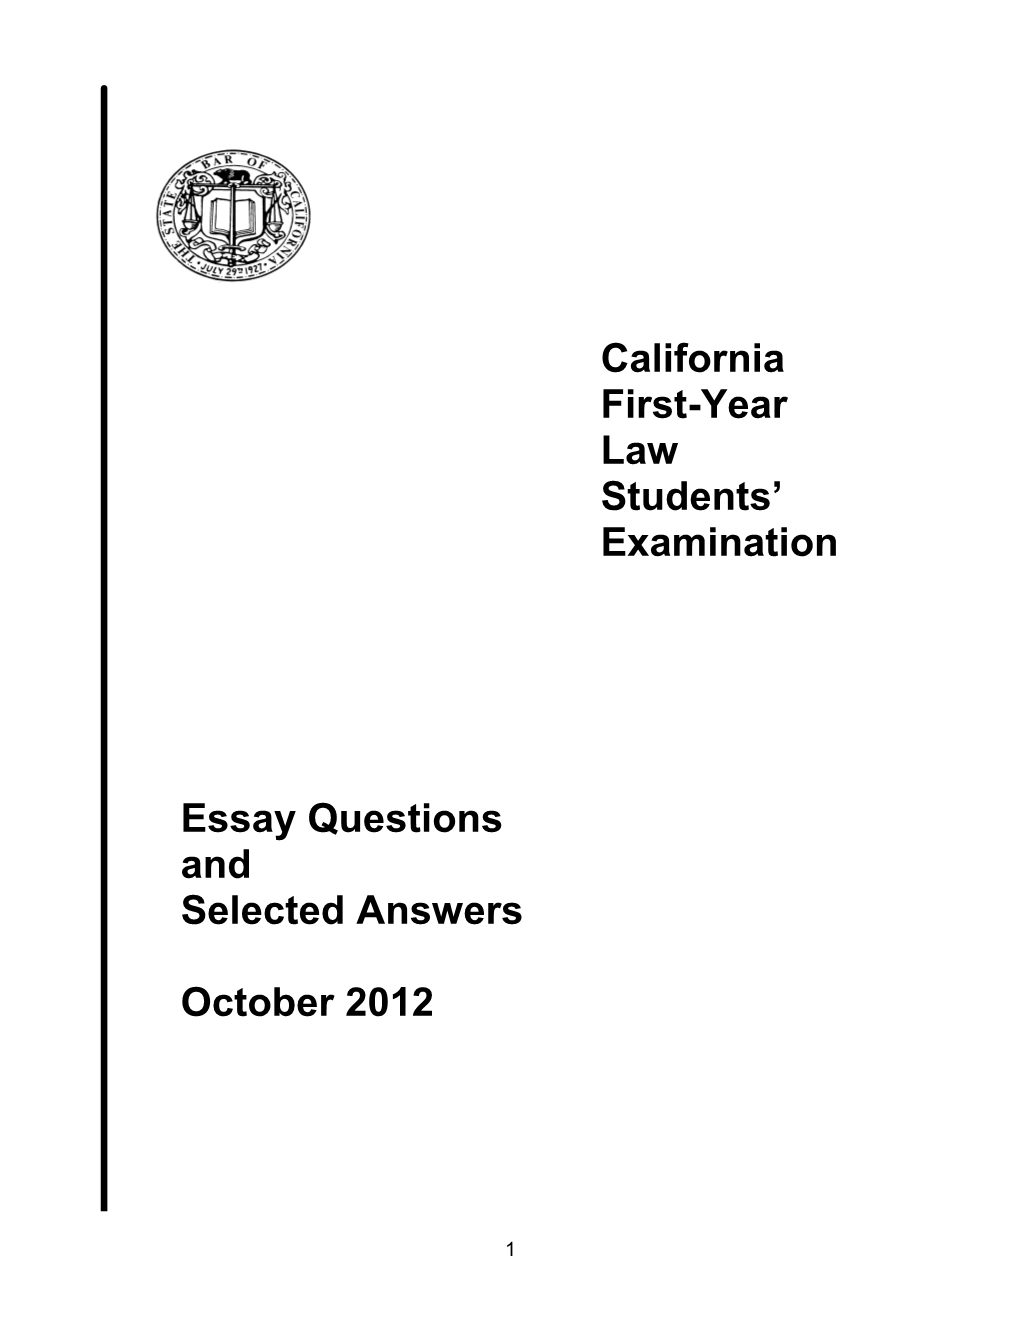 California First-Year Law Students' Examination Essay Questions And